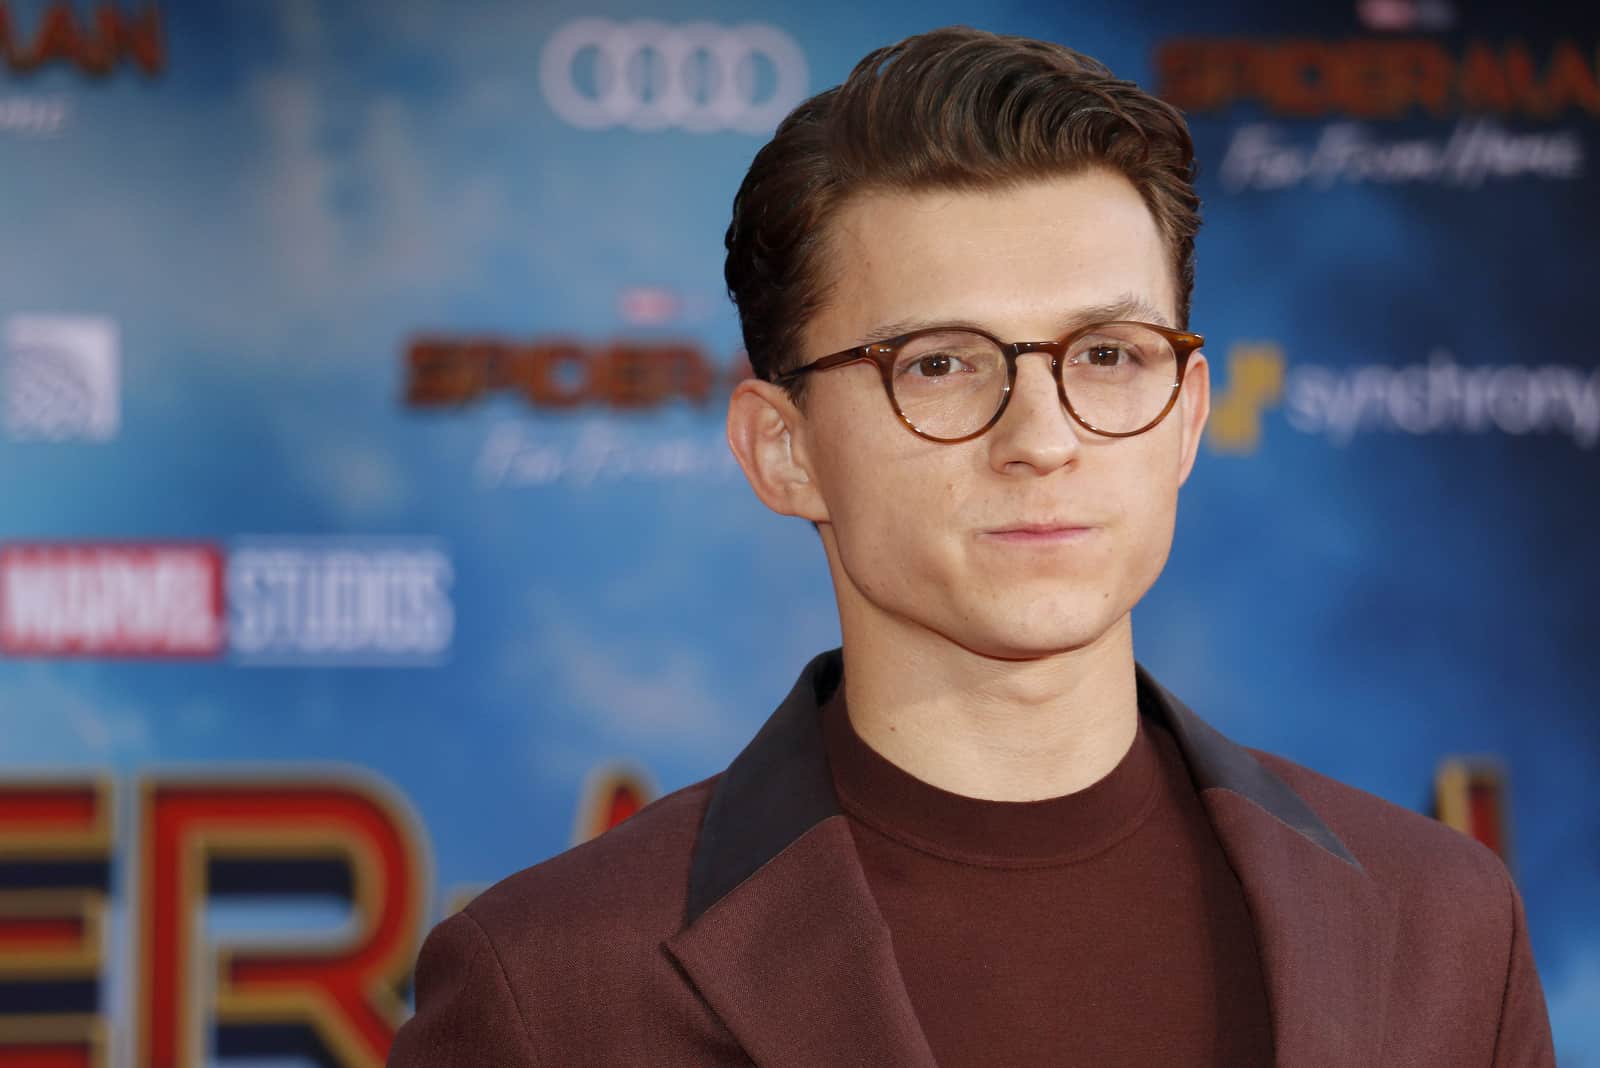 Superheroes Cry Too: Tom Holland Tears Up After Watching “Spider-Man” Trailer